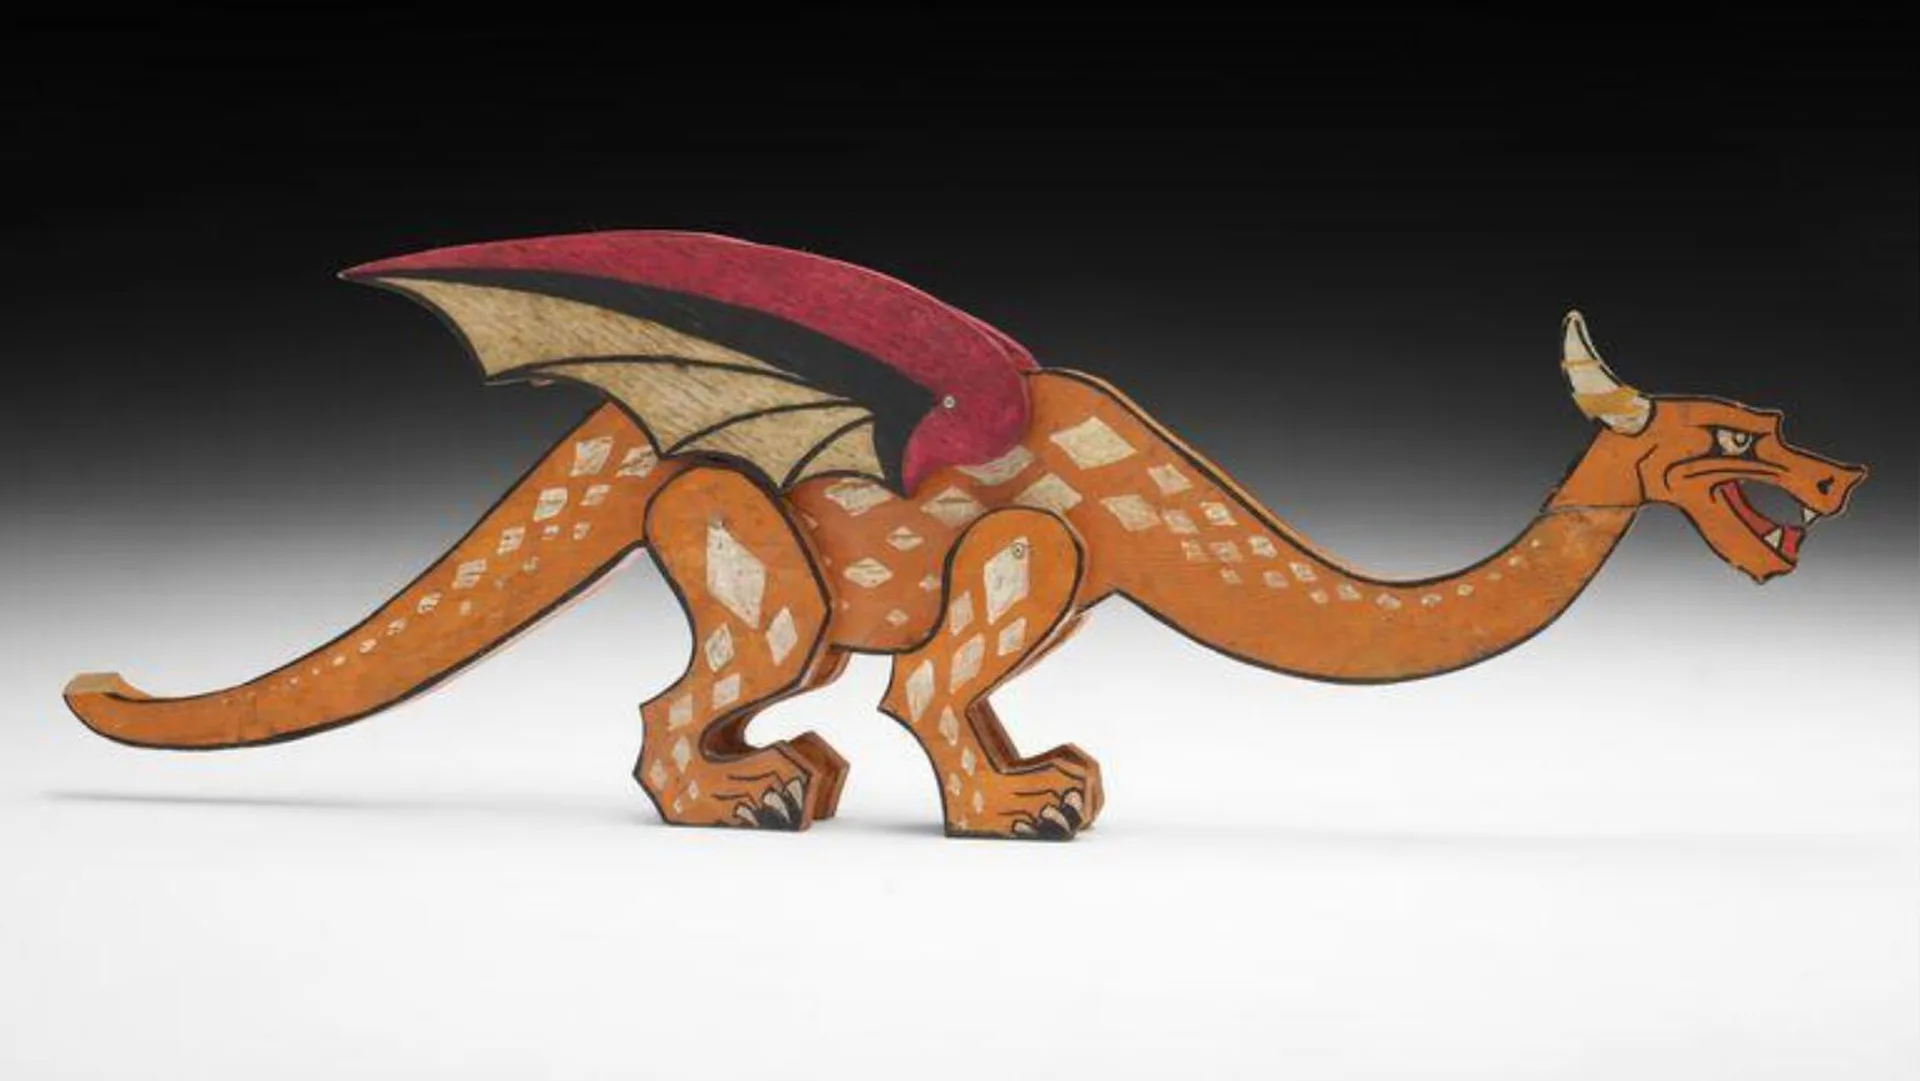 Photograph of a toy wooden dragon